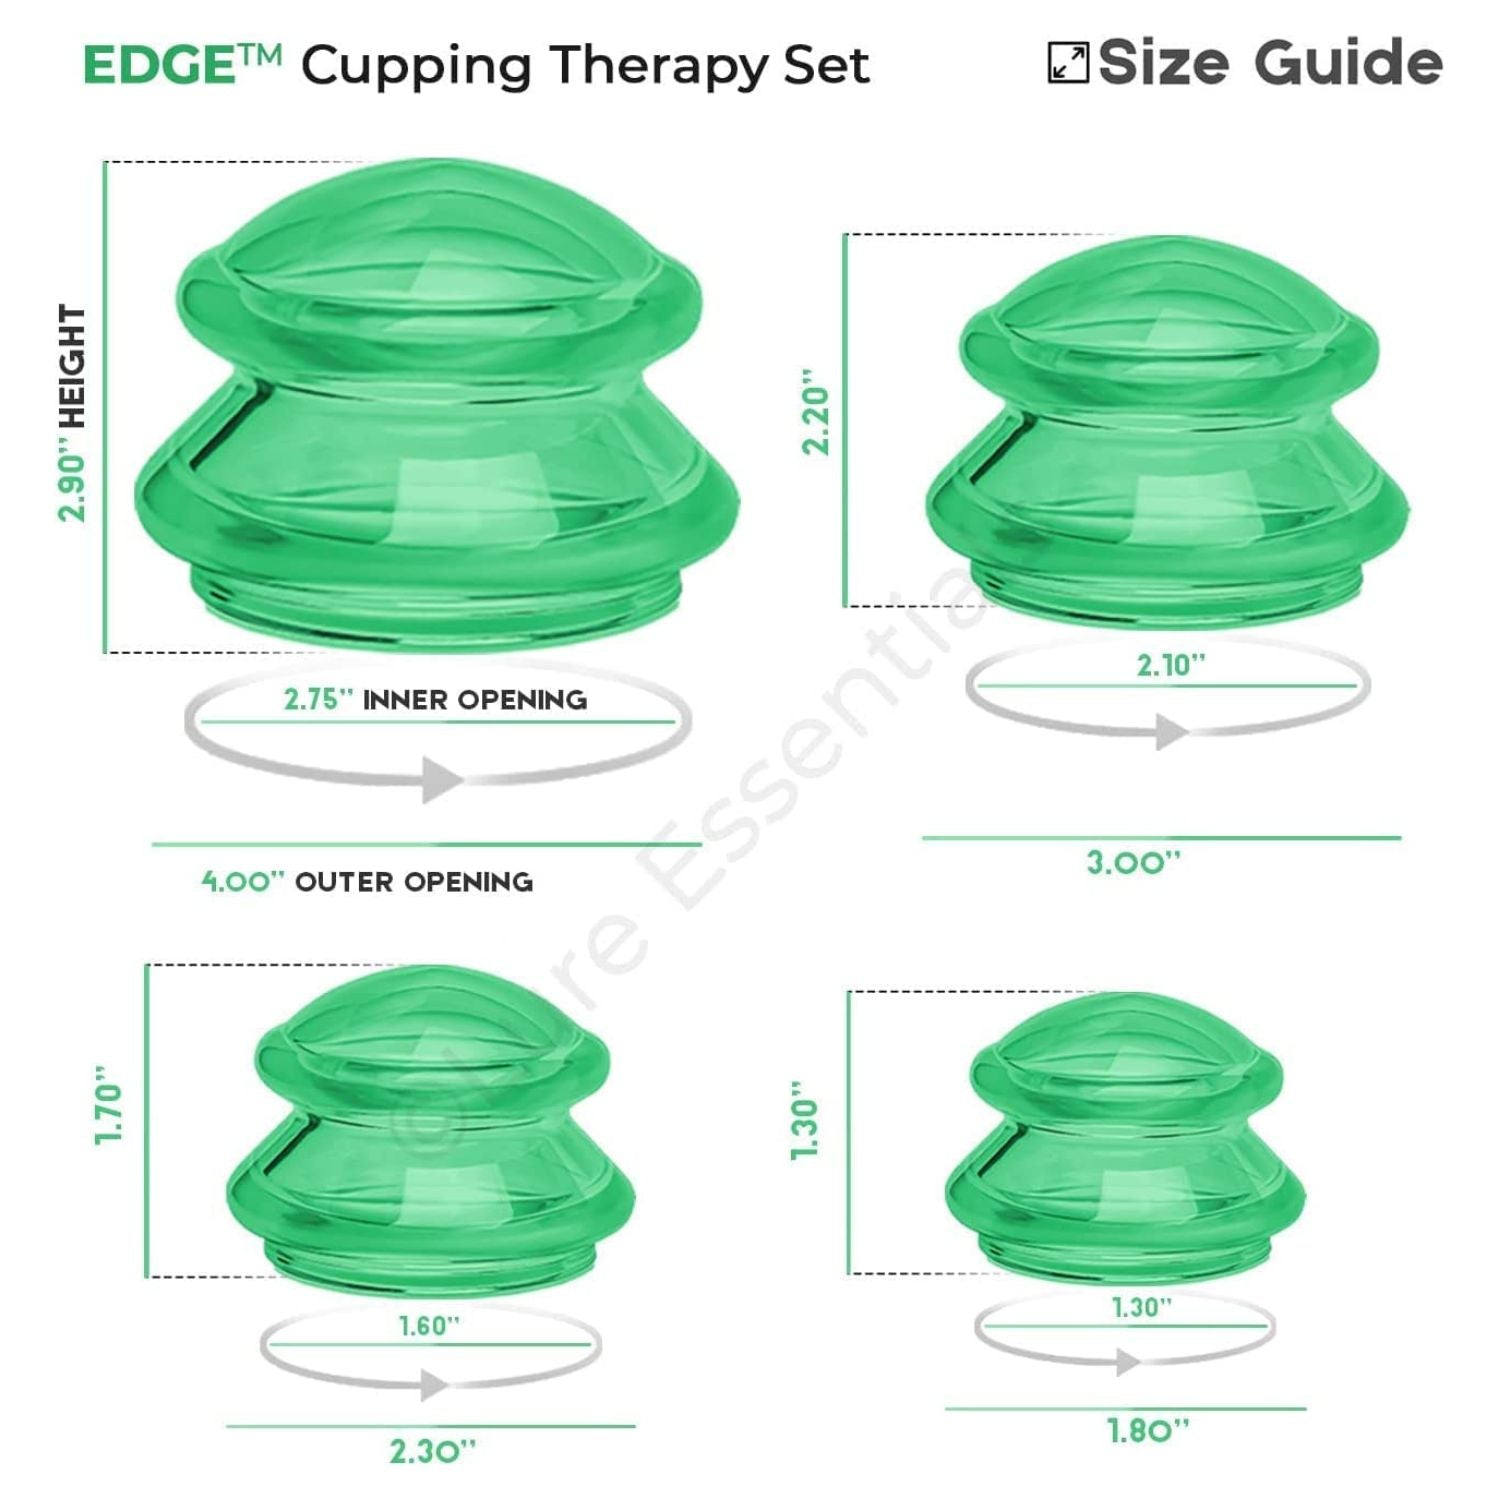 Mua LURE Essentials Edge Cupping Therapy Set - Cupping Kit for